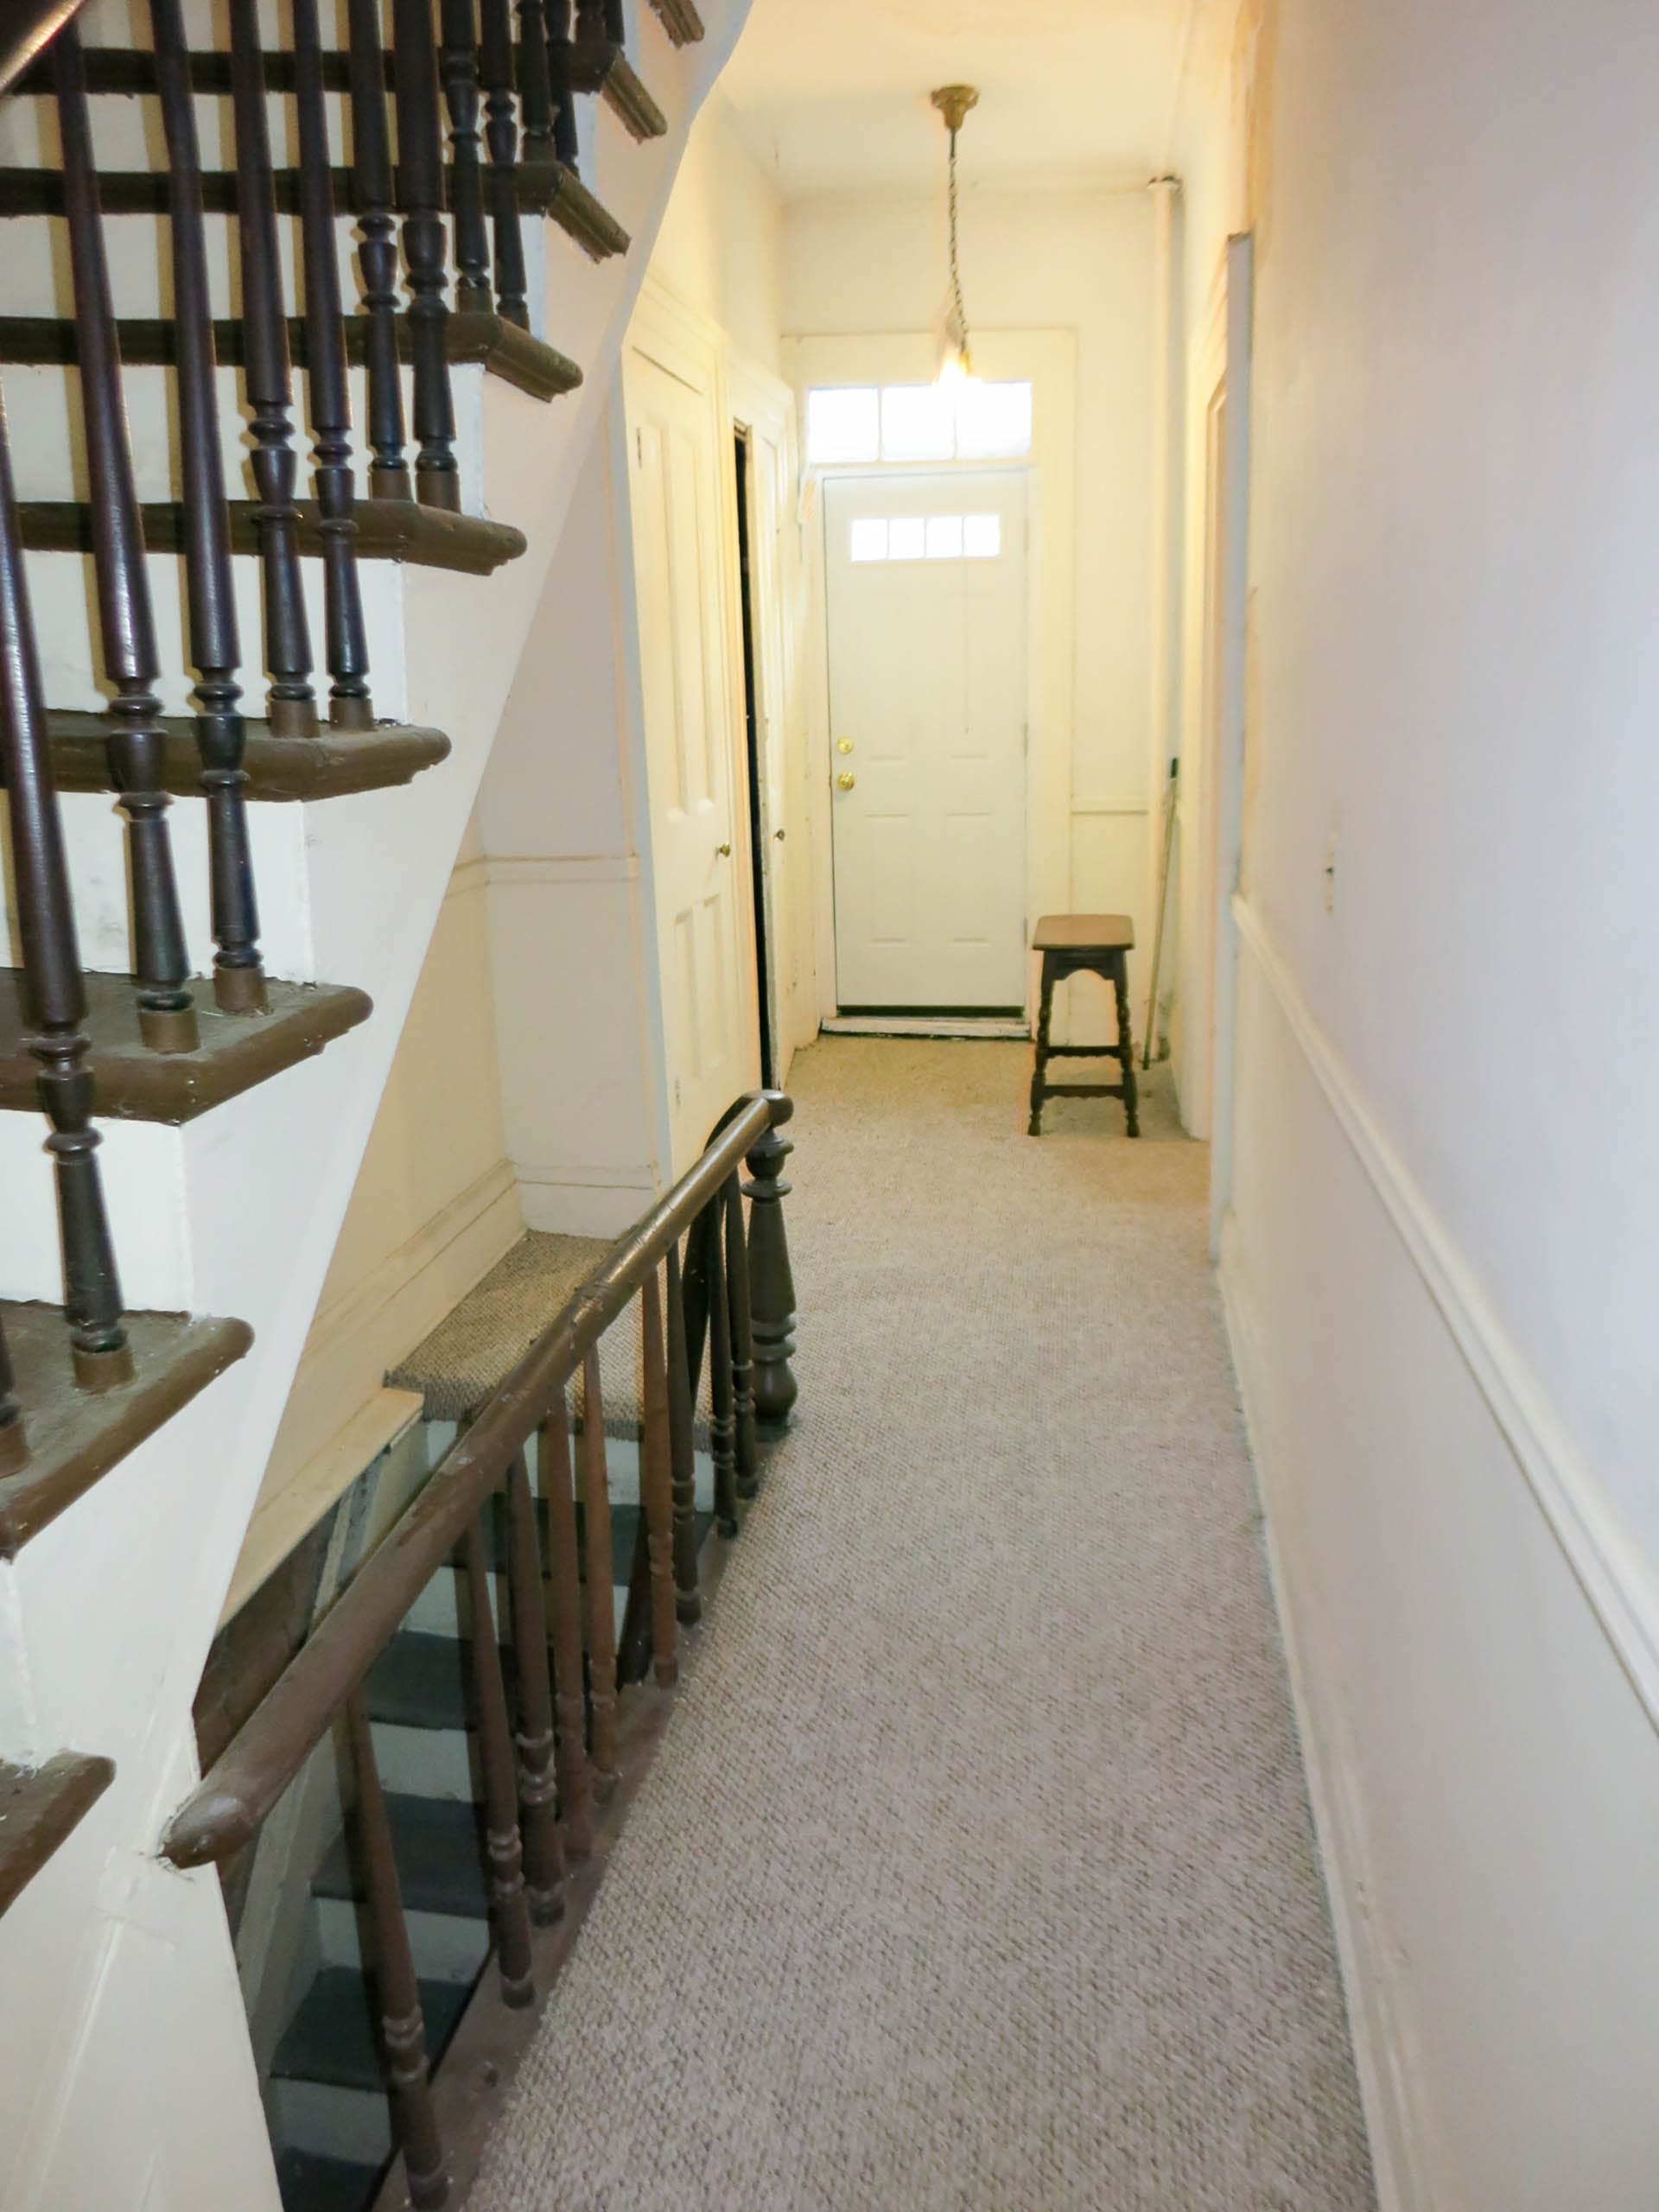 Entryway and staircase of a Brooklyn Heights home before renovation.